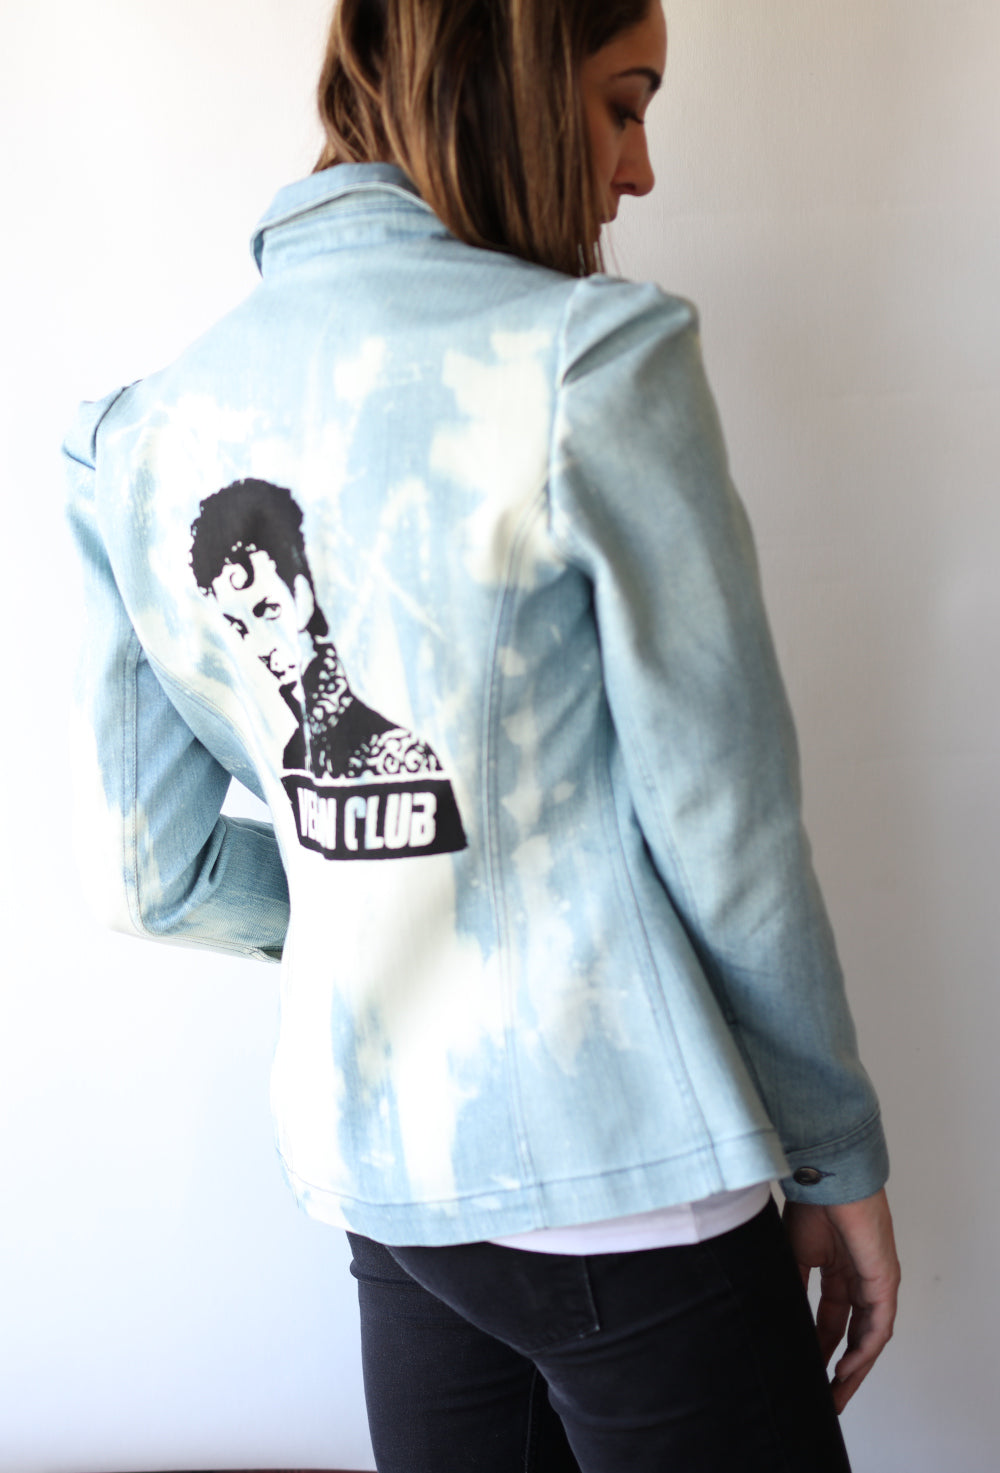 Haute Couture One of a Kind Up-cycled New Jacket featuring "Prince" Collab & Design by Jarod-Pi